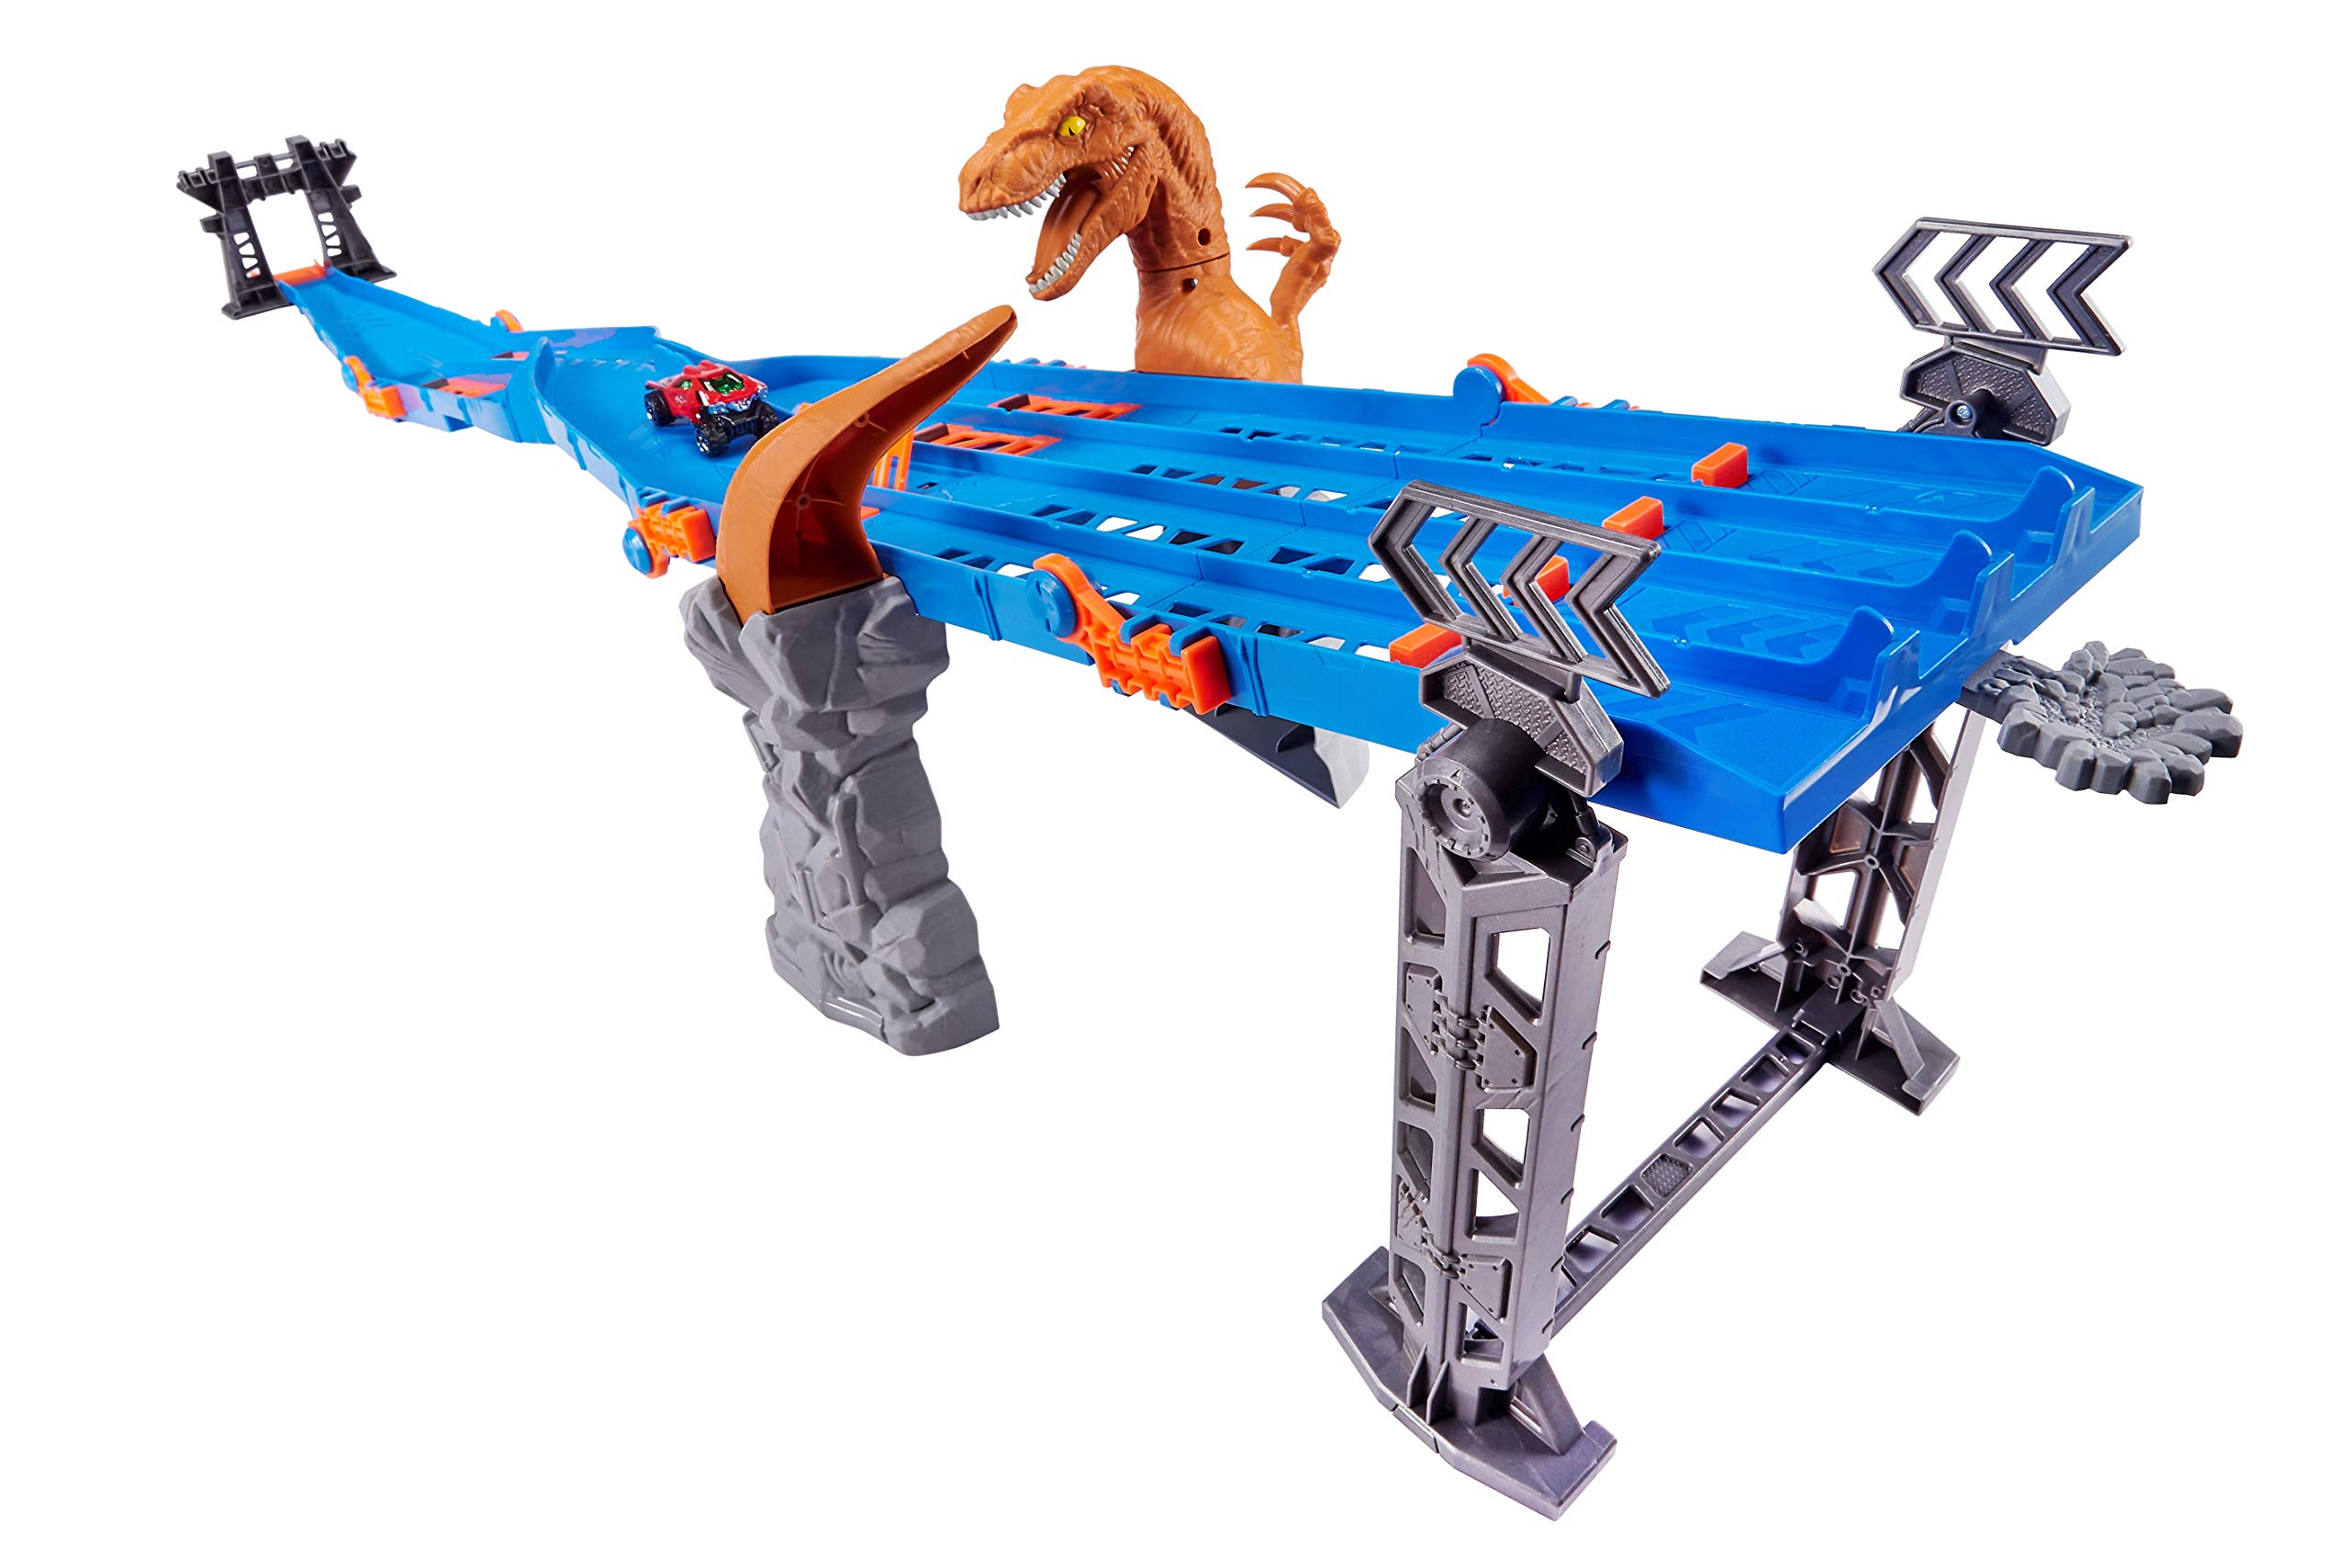 Metal Machines 4-Lane Raptor Attack Track Set Playset with Mini Racing Car by ZURU Cars Play Set Compatible with Other Brands